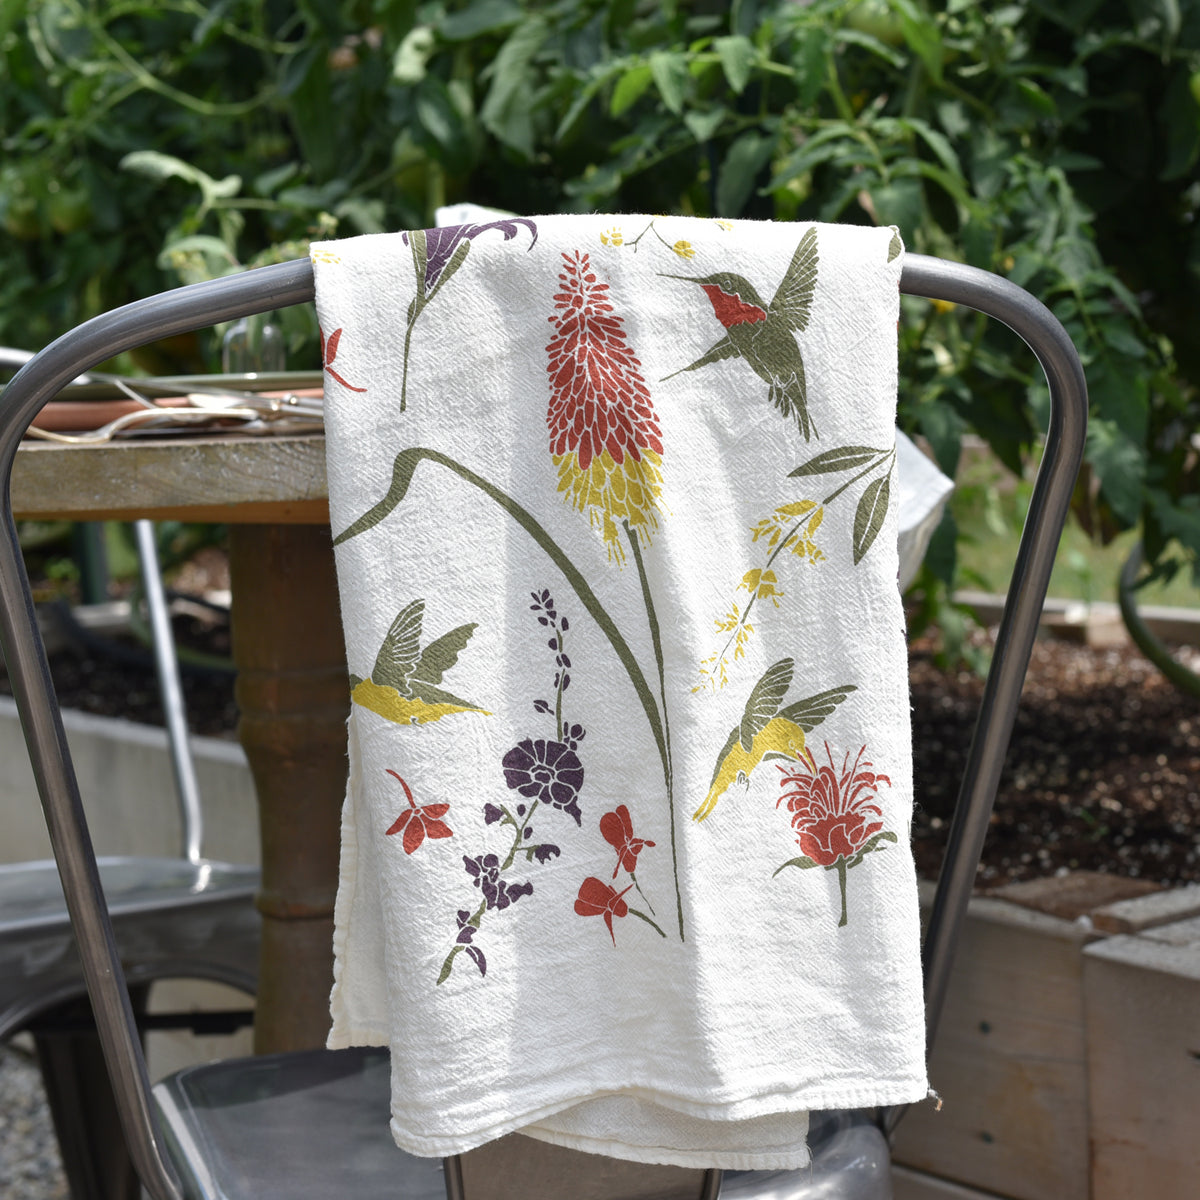 Large Natural Kitchen Towels, Free The Ocean